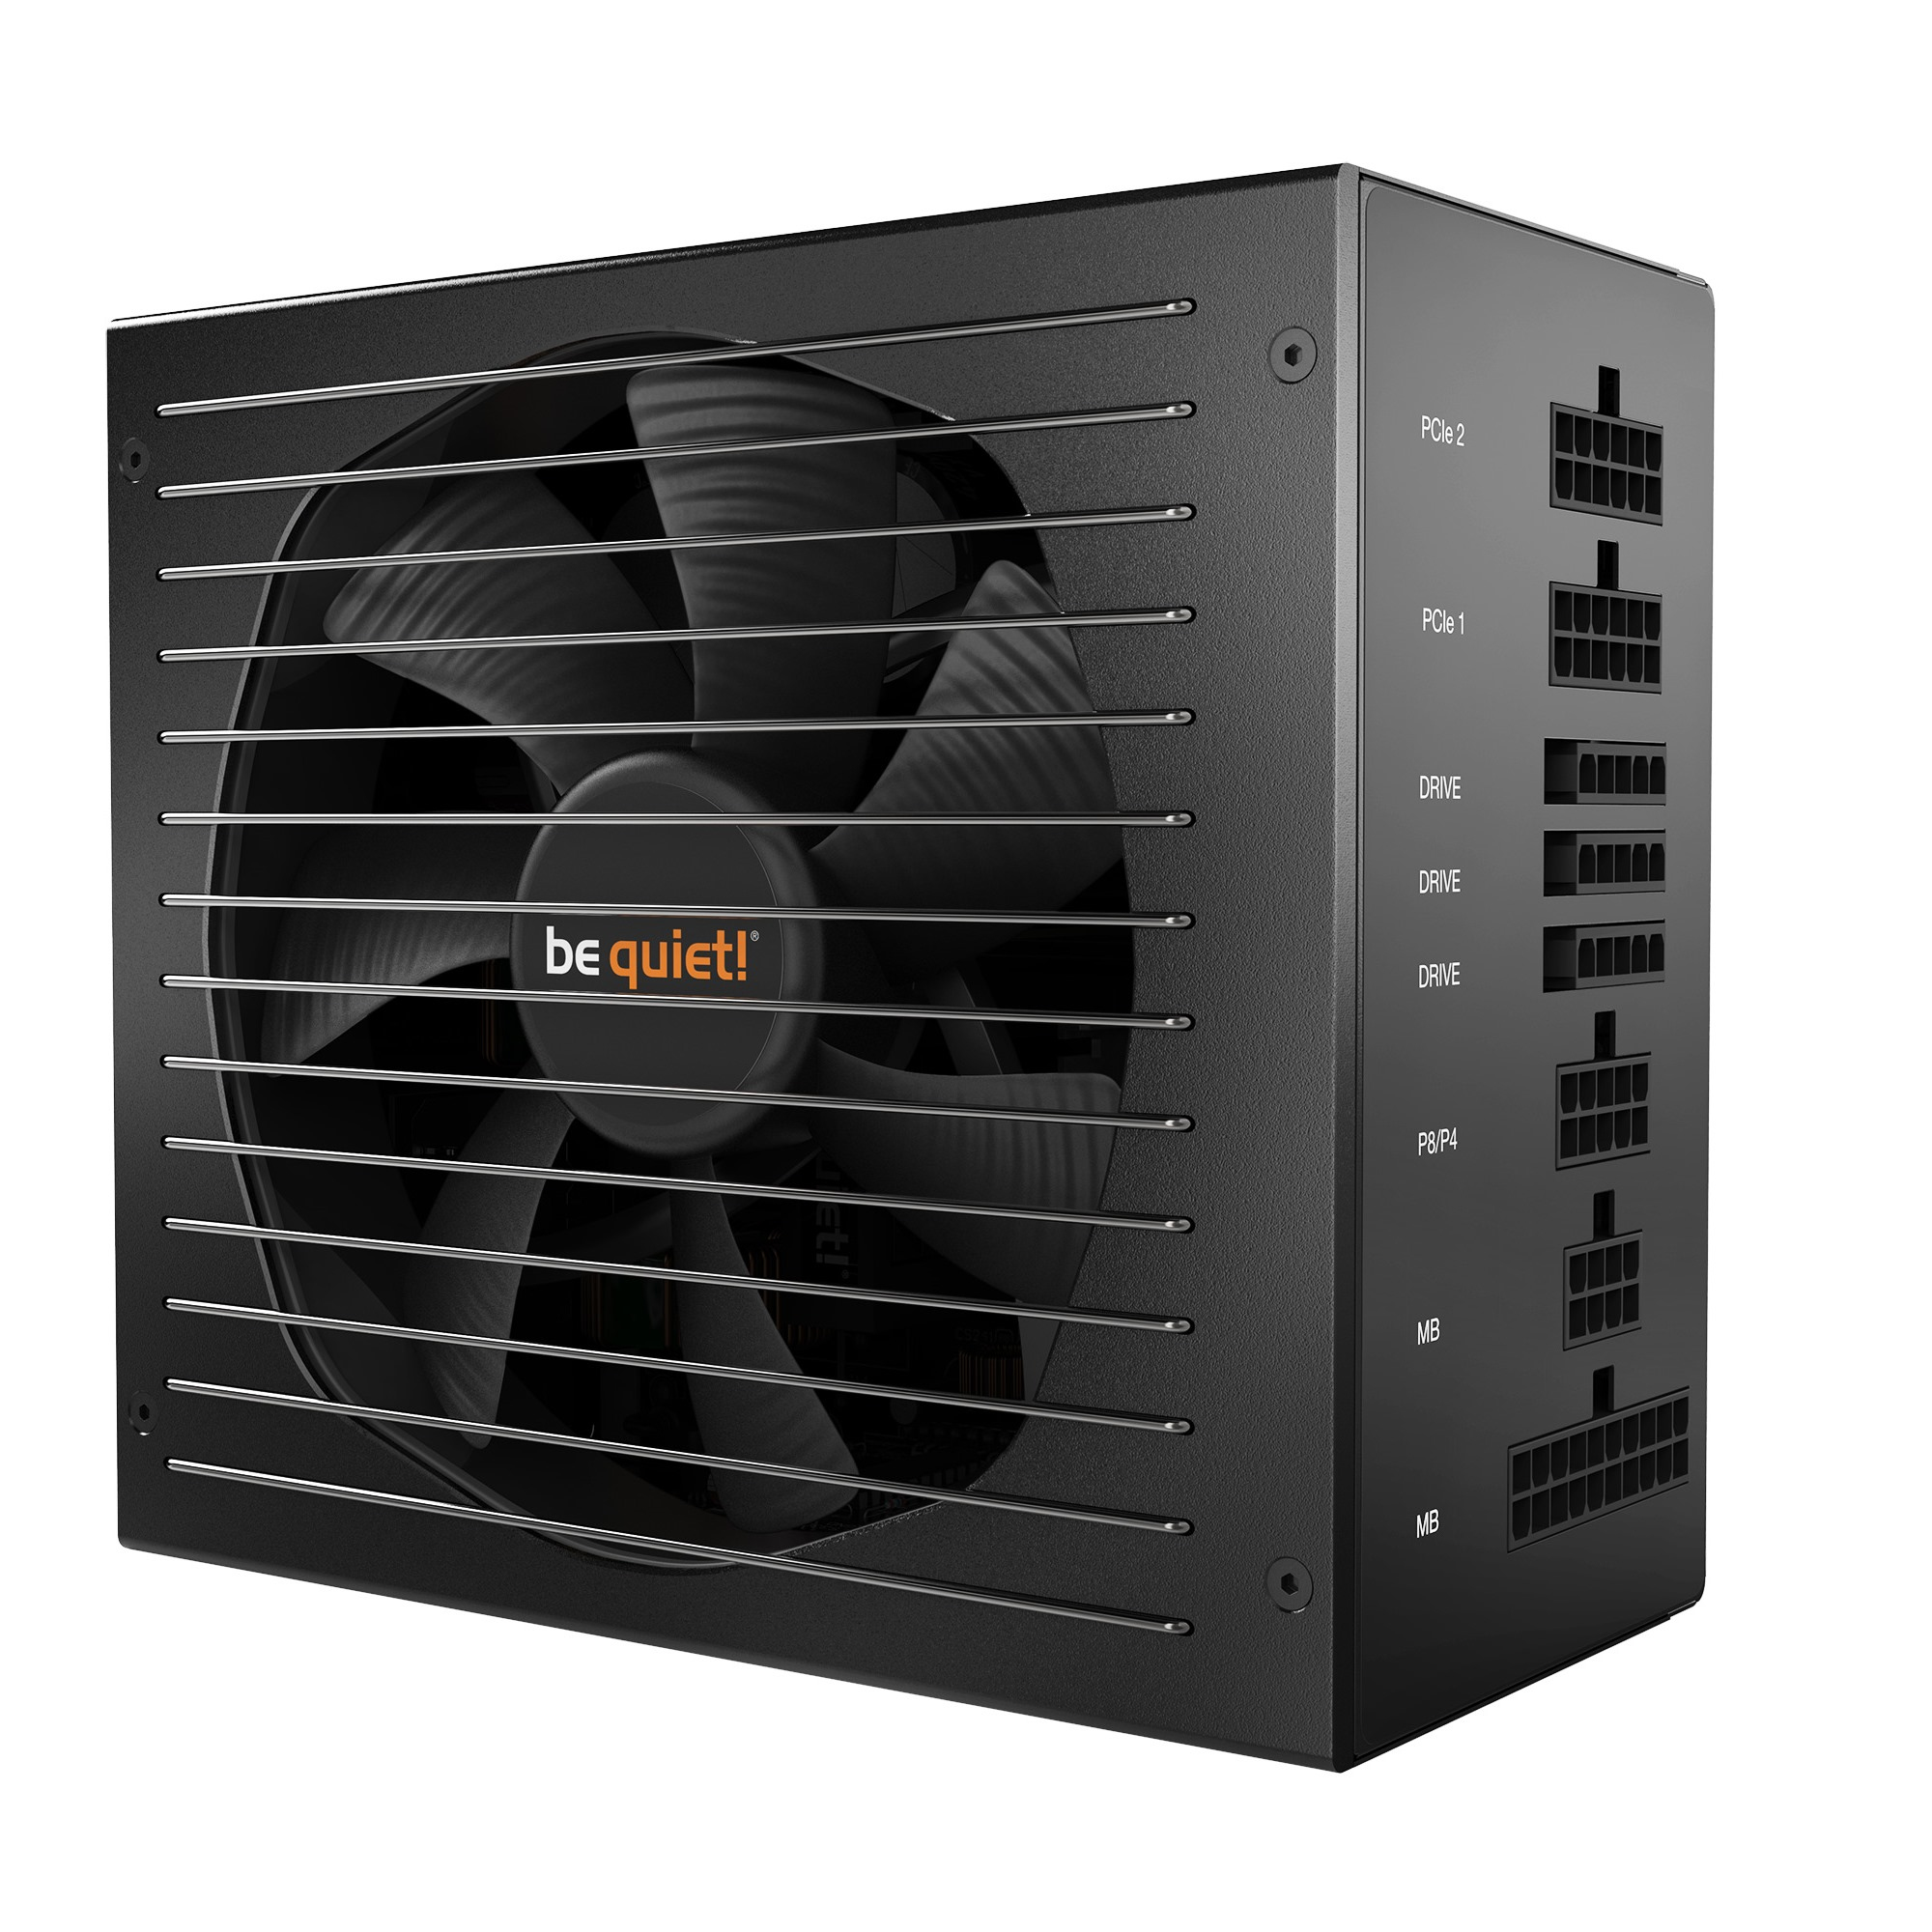 be quiet! Straight Power 11 650W, 80+ Gold, ErP, Energy Star 6.1 APFC, Sleeved, 4xPCI-Ex, 9xSATA, 3xPATA, Full Cable Management, DC Wire Free, Silent Wings 3 135 // E11-650W